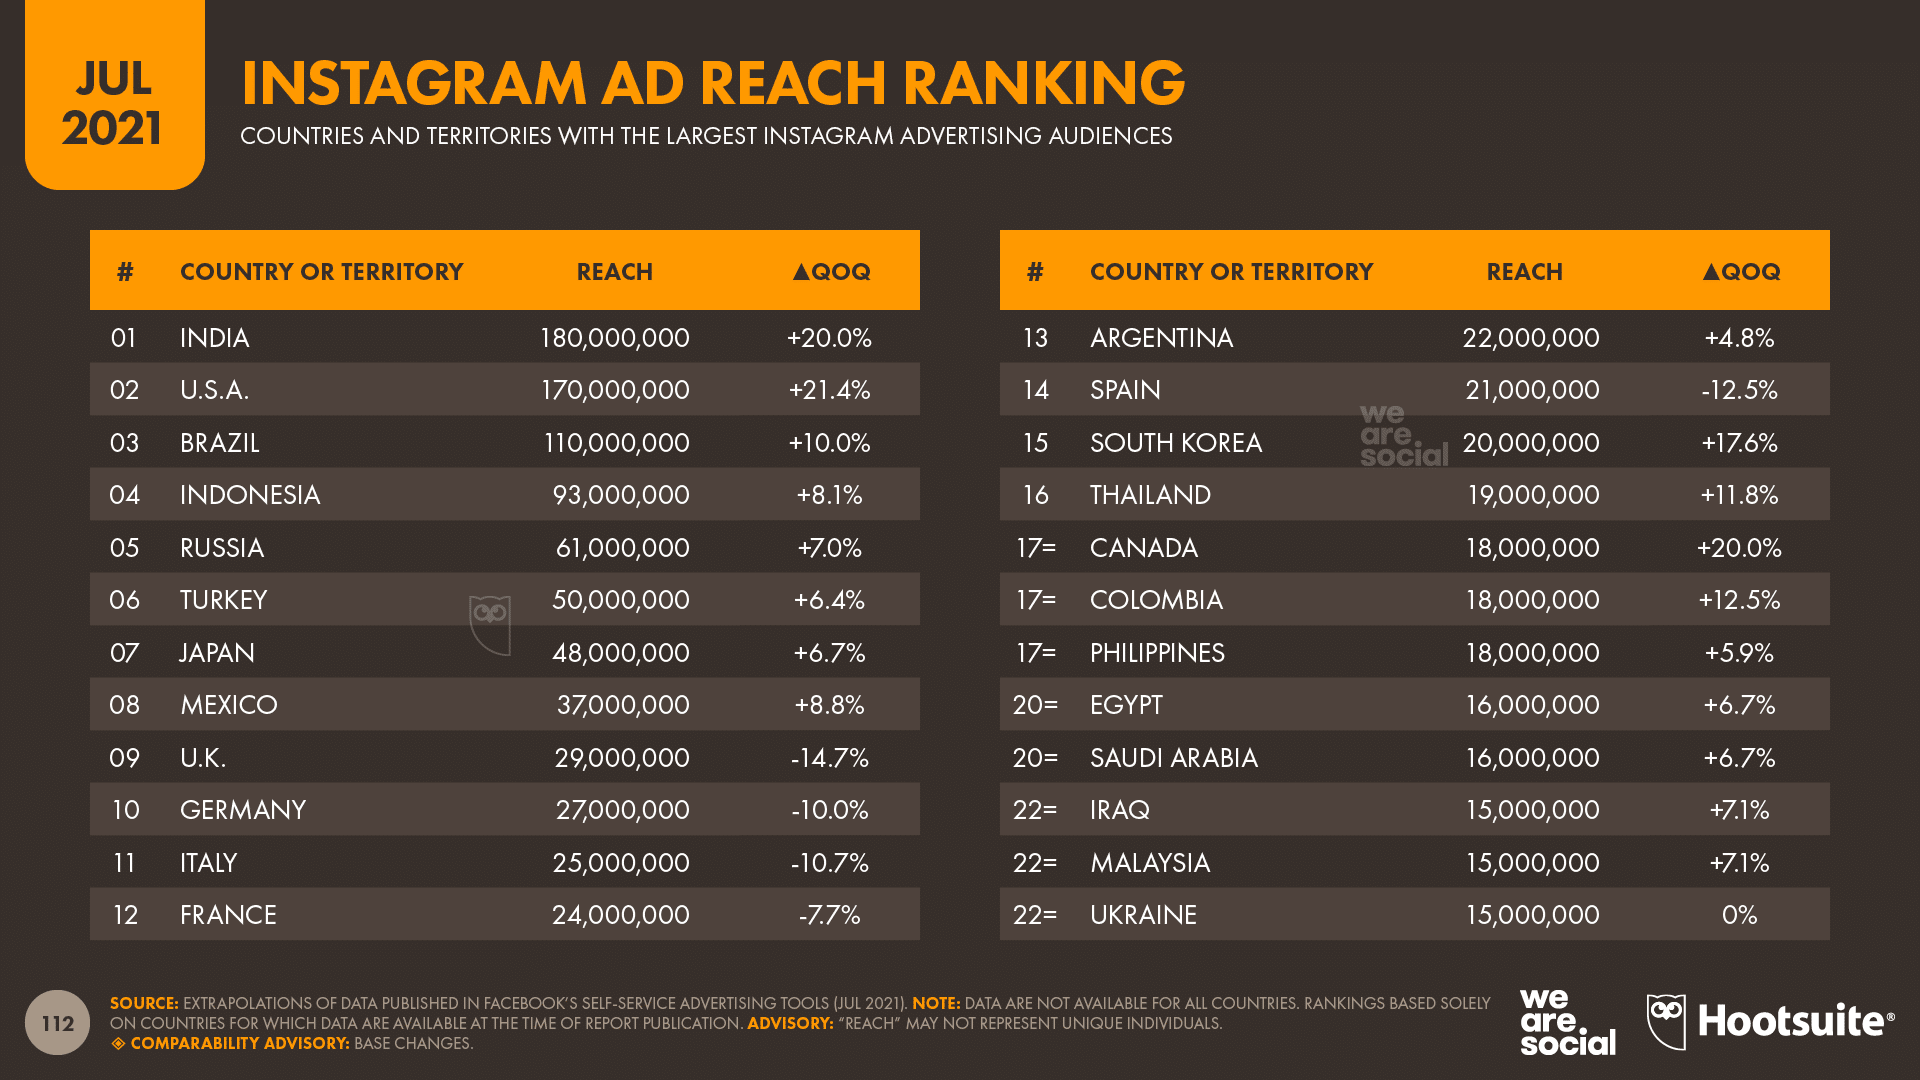 chart showing Instagram ad reach ranking as of July 2021